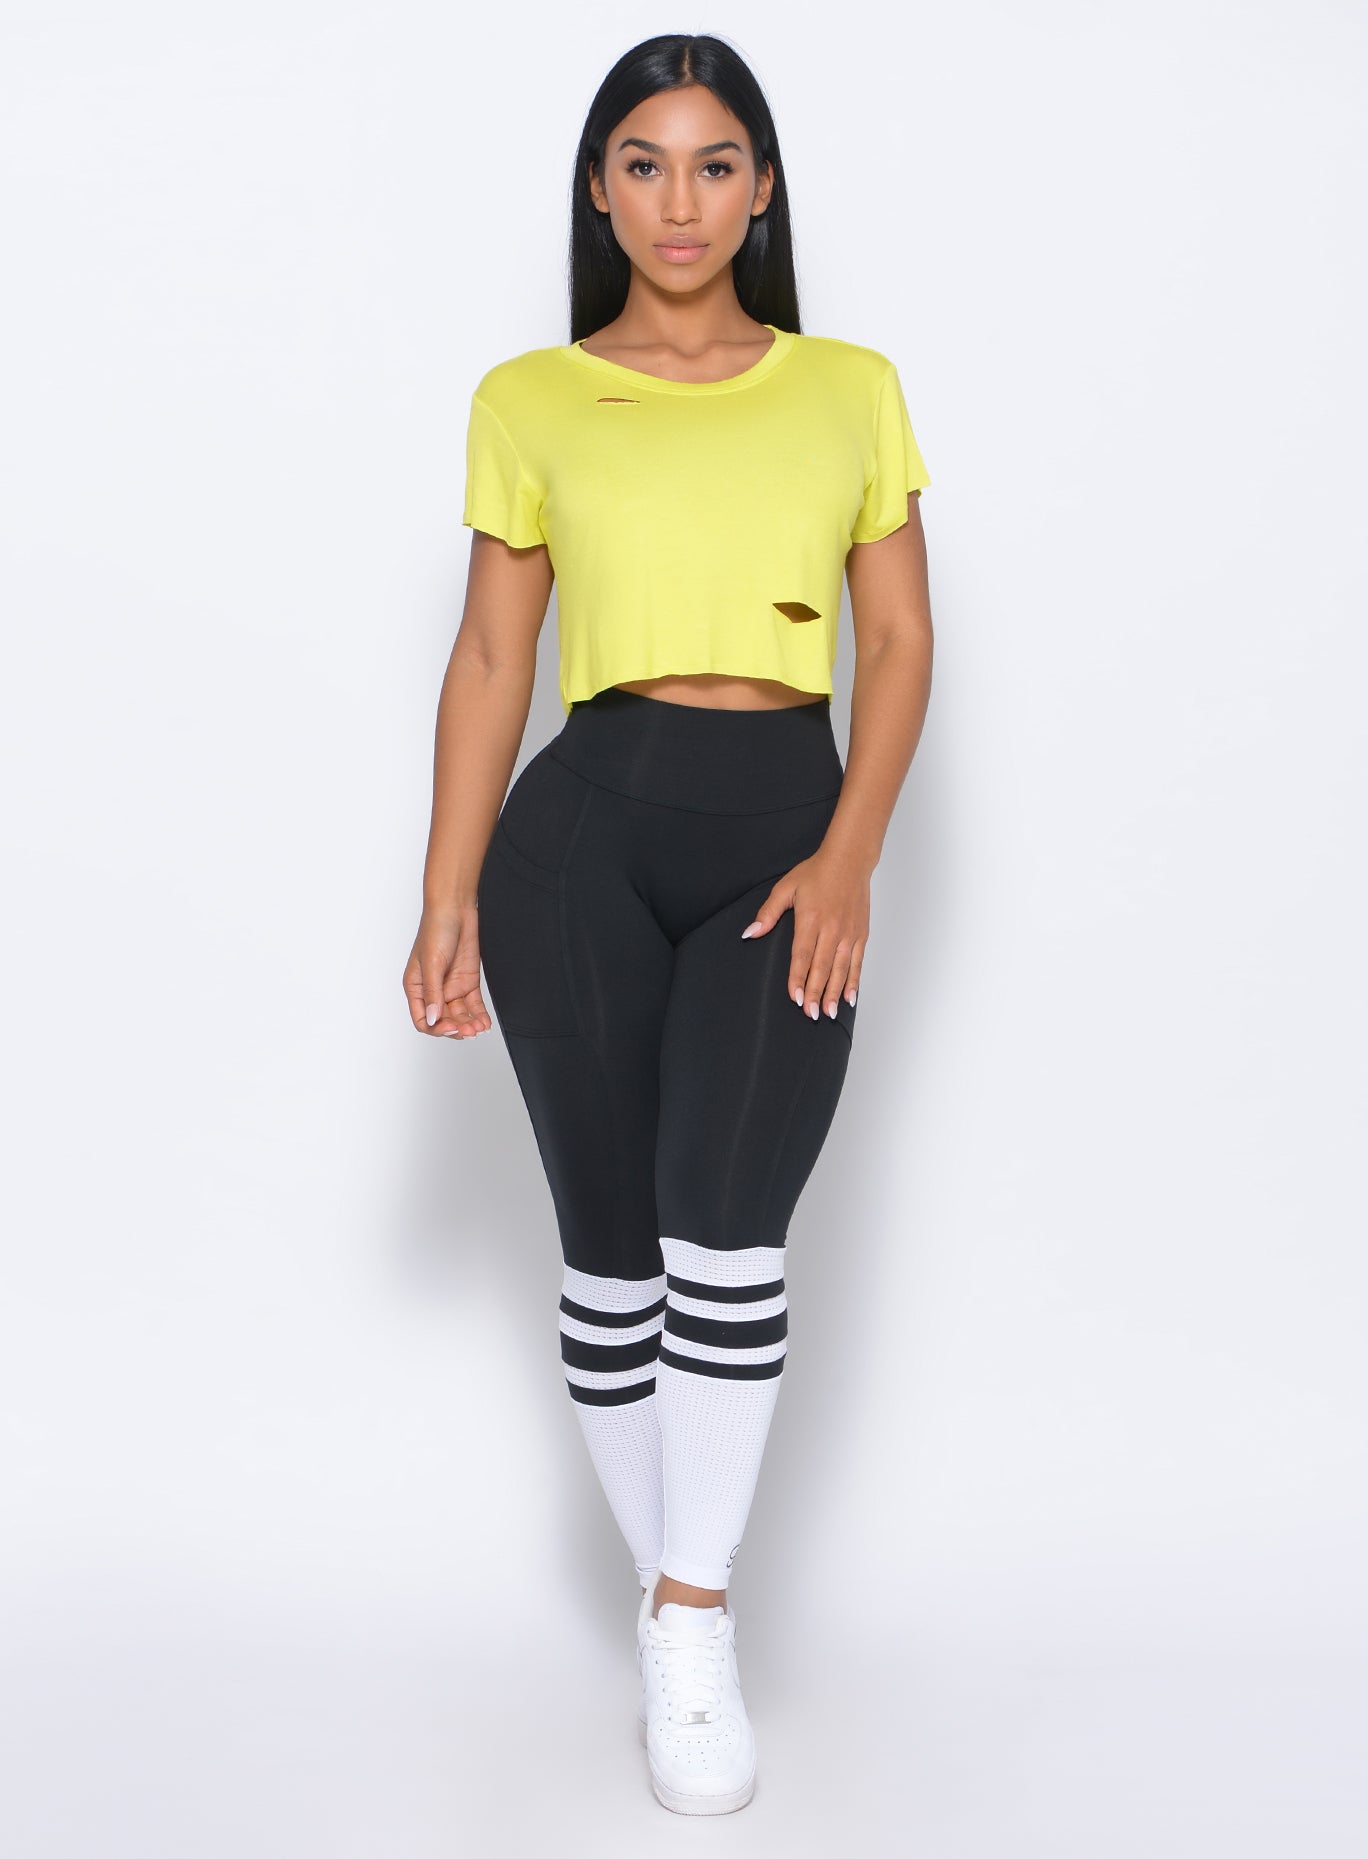 Model facing forward wearing our shredded tee in neon yellow and a black sock leggings